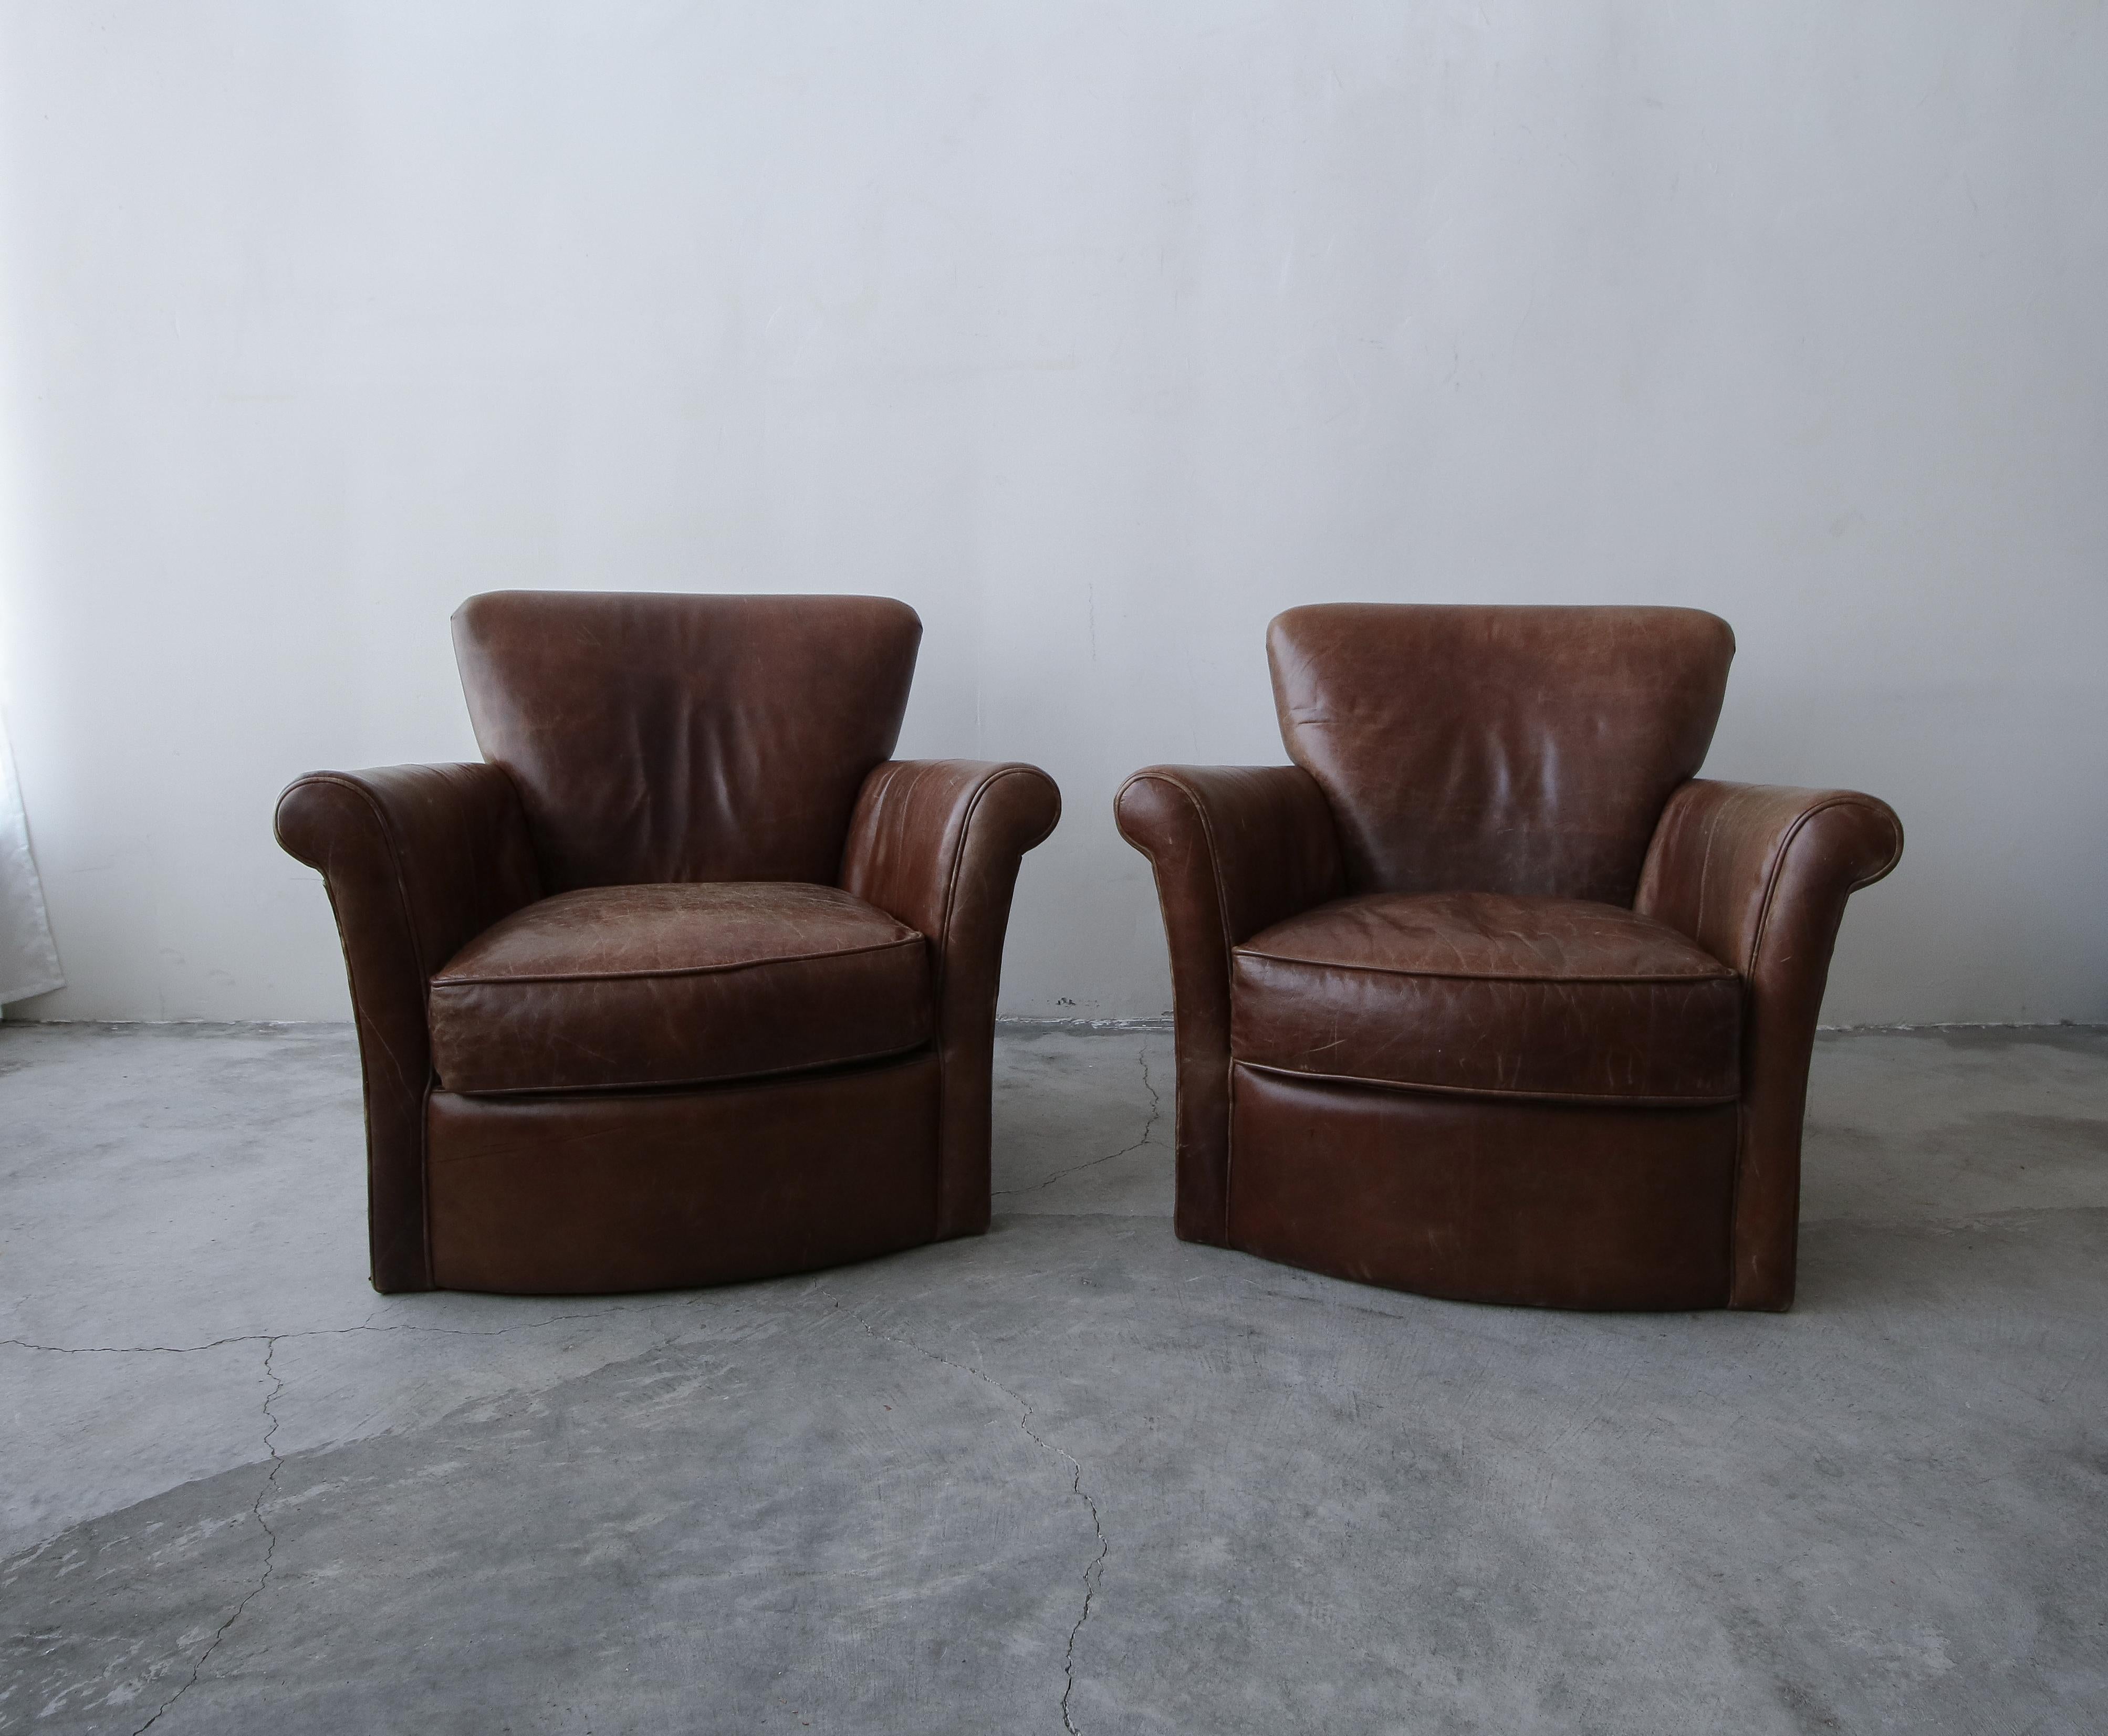 A beautiful pair of properly patinaed leather club chairs. This pair is the epitome of perfect worn leather chairs. Chairs feature the kind of patina that money can't buy, the kind that only comes with use over years. If you've been looking for a